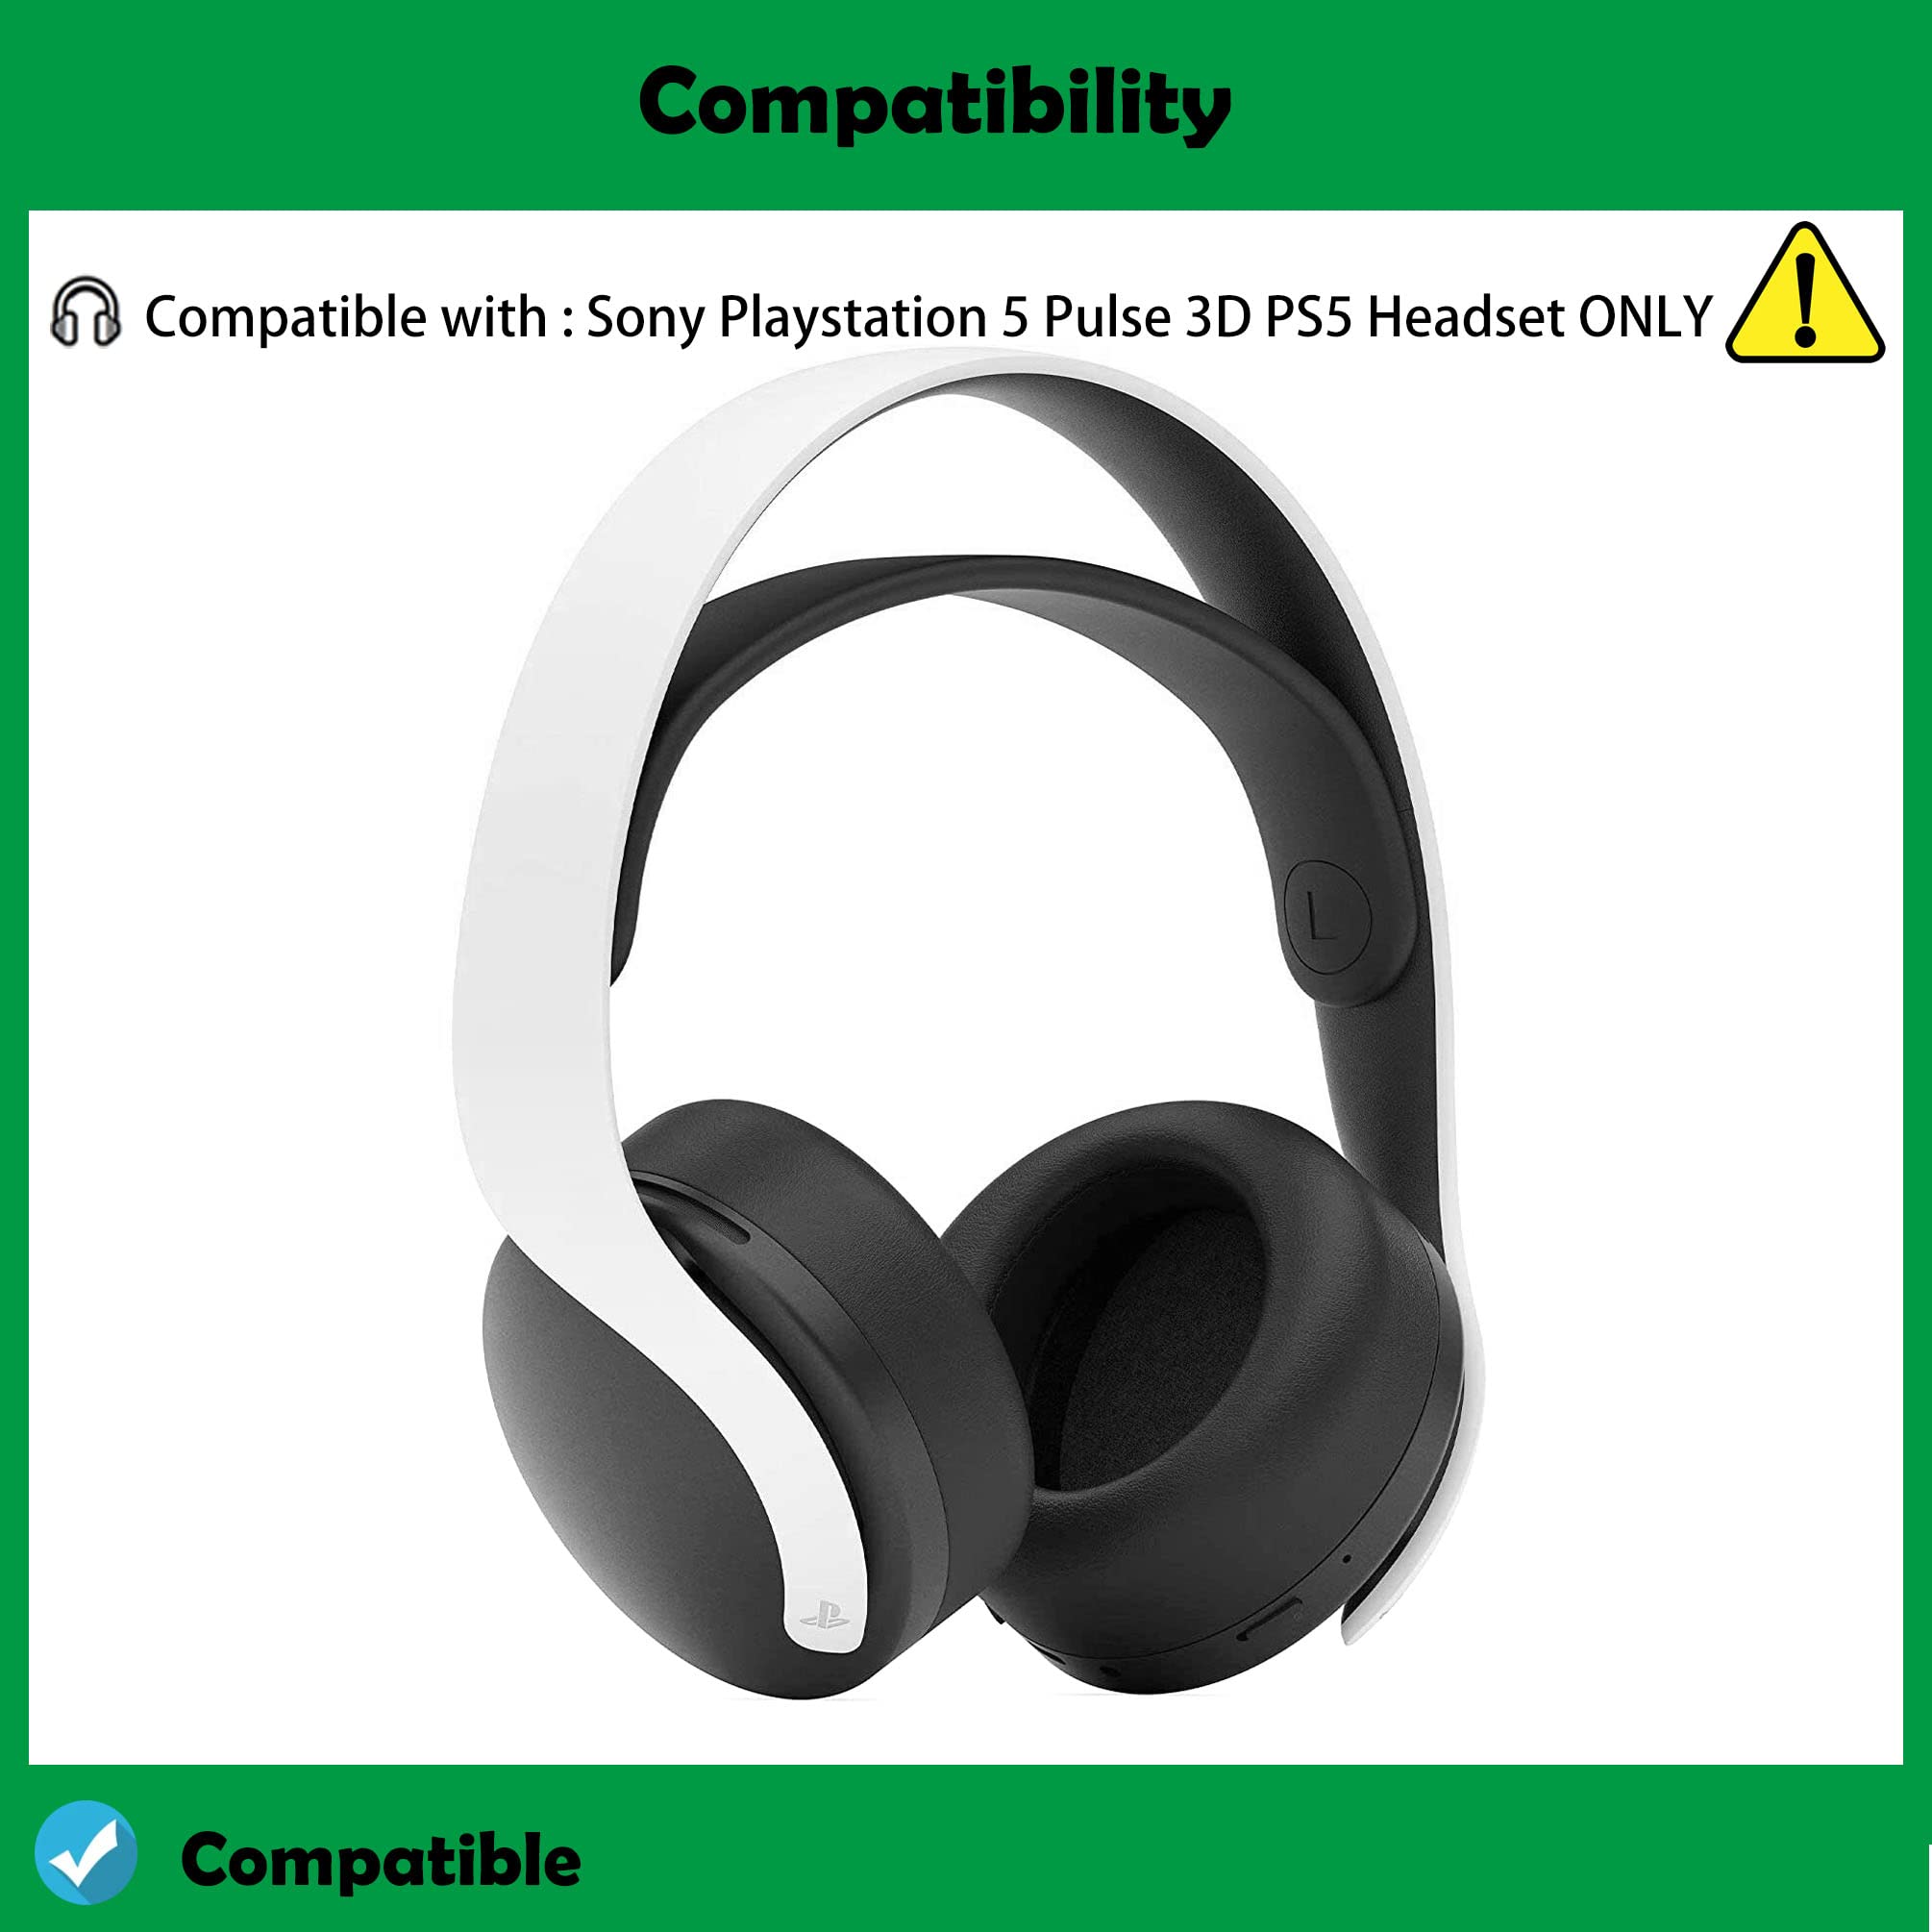 DowiTech Cooling Gel Headset Ear Cushions Replacement Ear Pads Headphone Earpads Compatible with Sony Playstation 5 Pulse 3D PS5 Headset